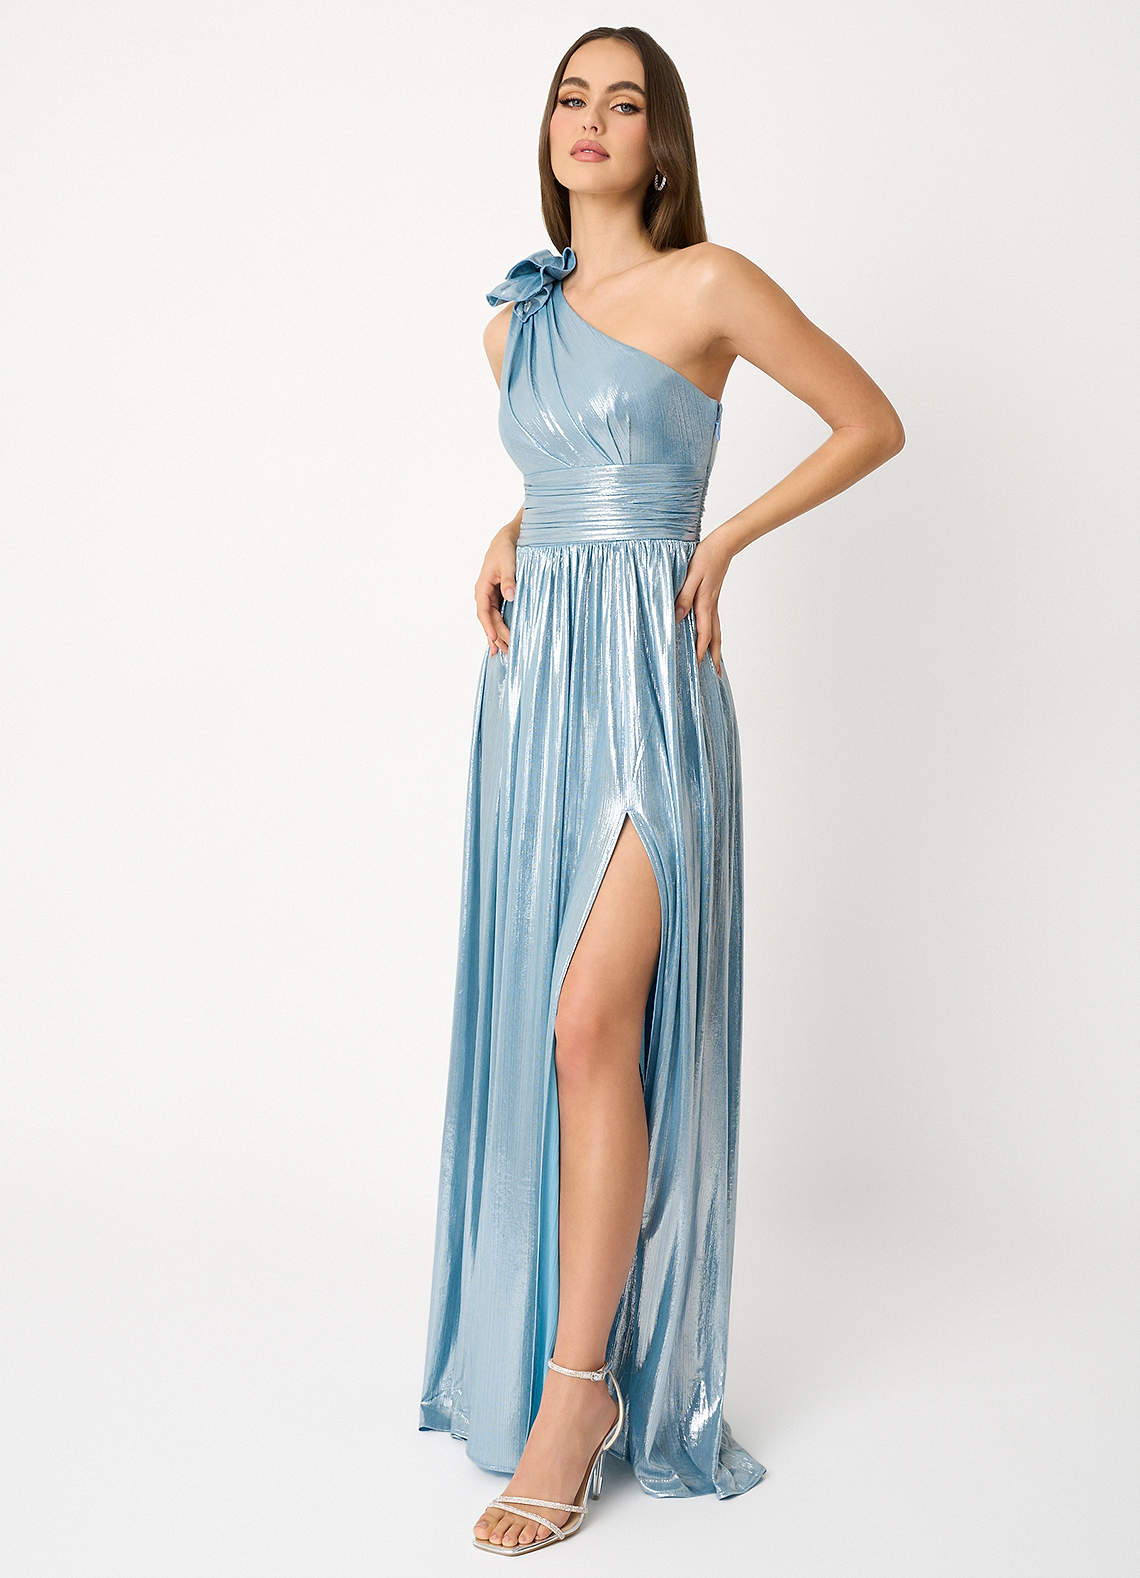 Ivy Aqua Blue Pleated Gown image1